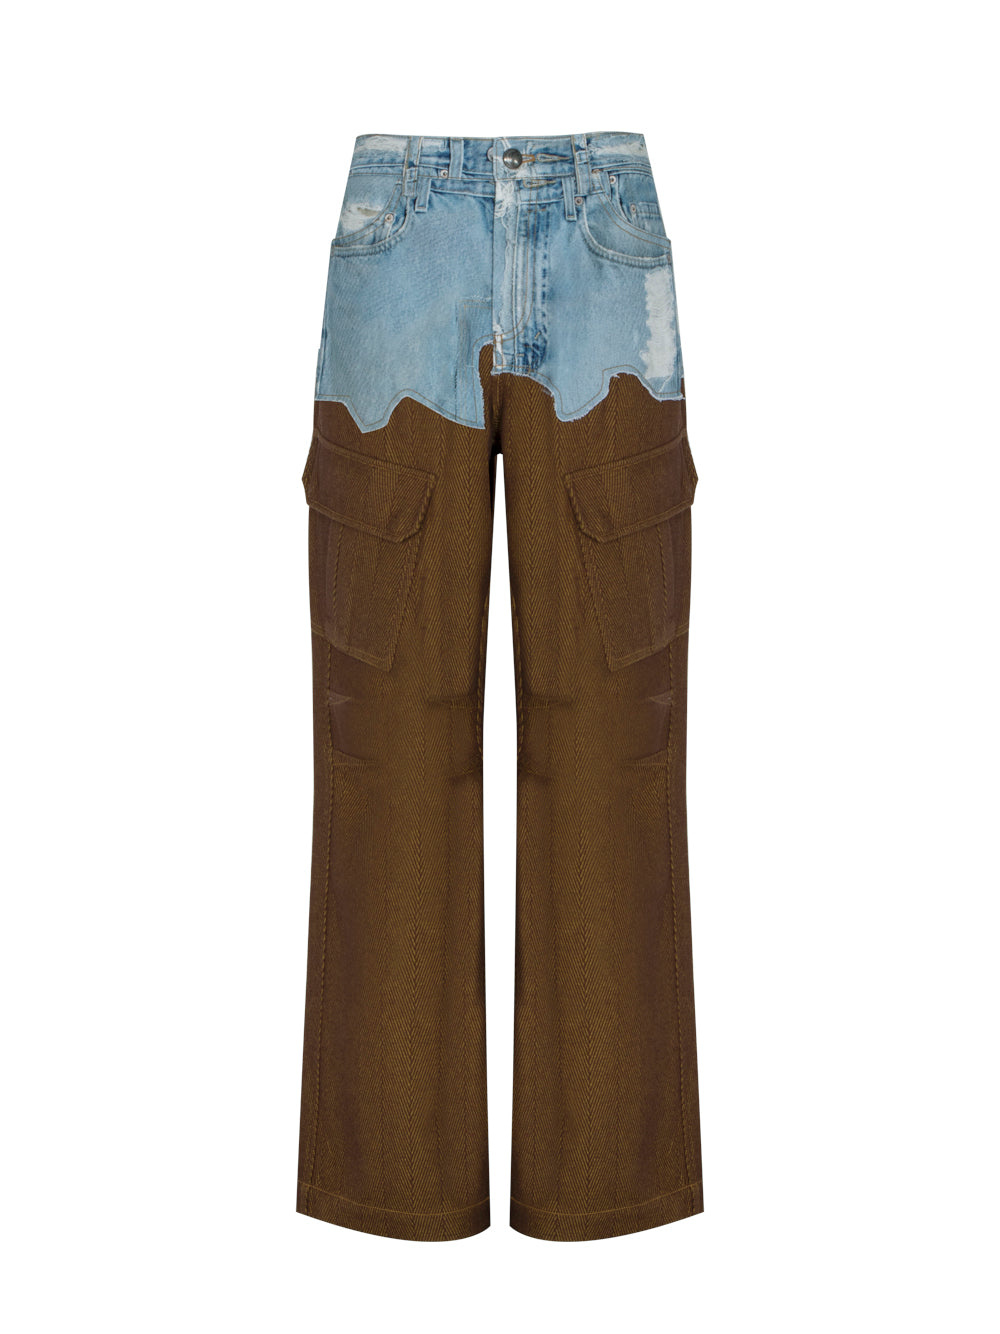 Faux-Denim and Scratch Leather Printed Cargo-Pants (Denim/Brown)